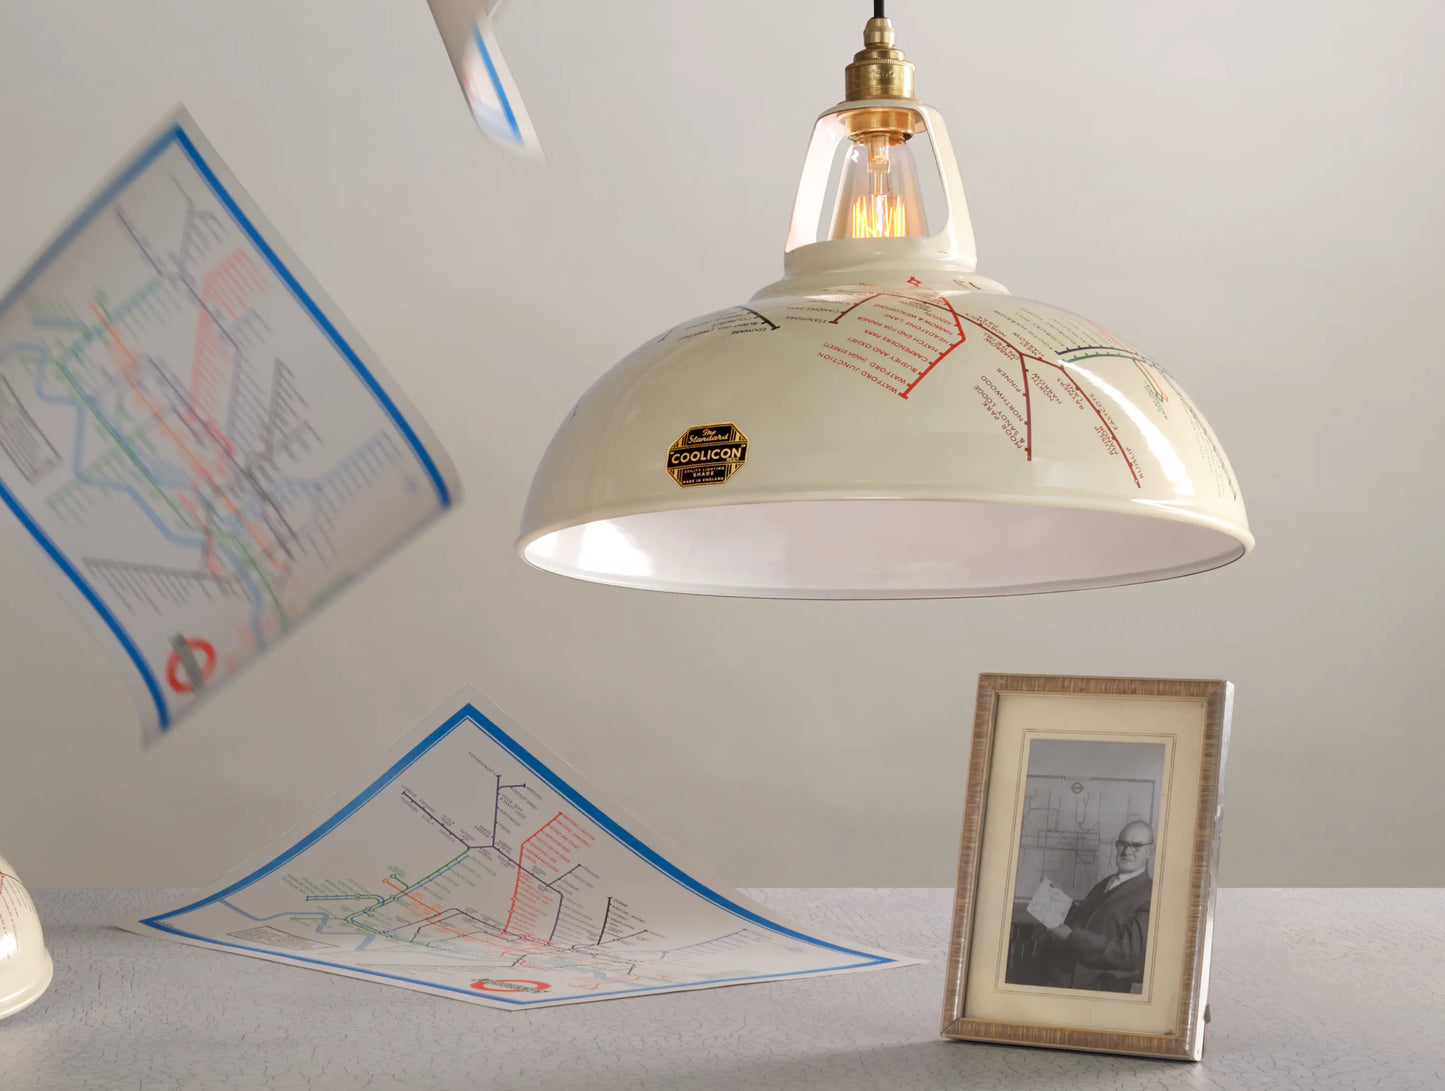 A Large Underground Map shade above a table. There is a framed black and white portrait of Harry Beck on the table. In the background, three 1933 maps are falling from the ceiling